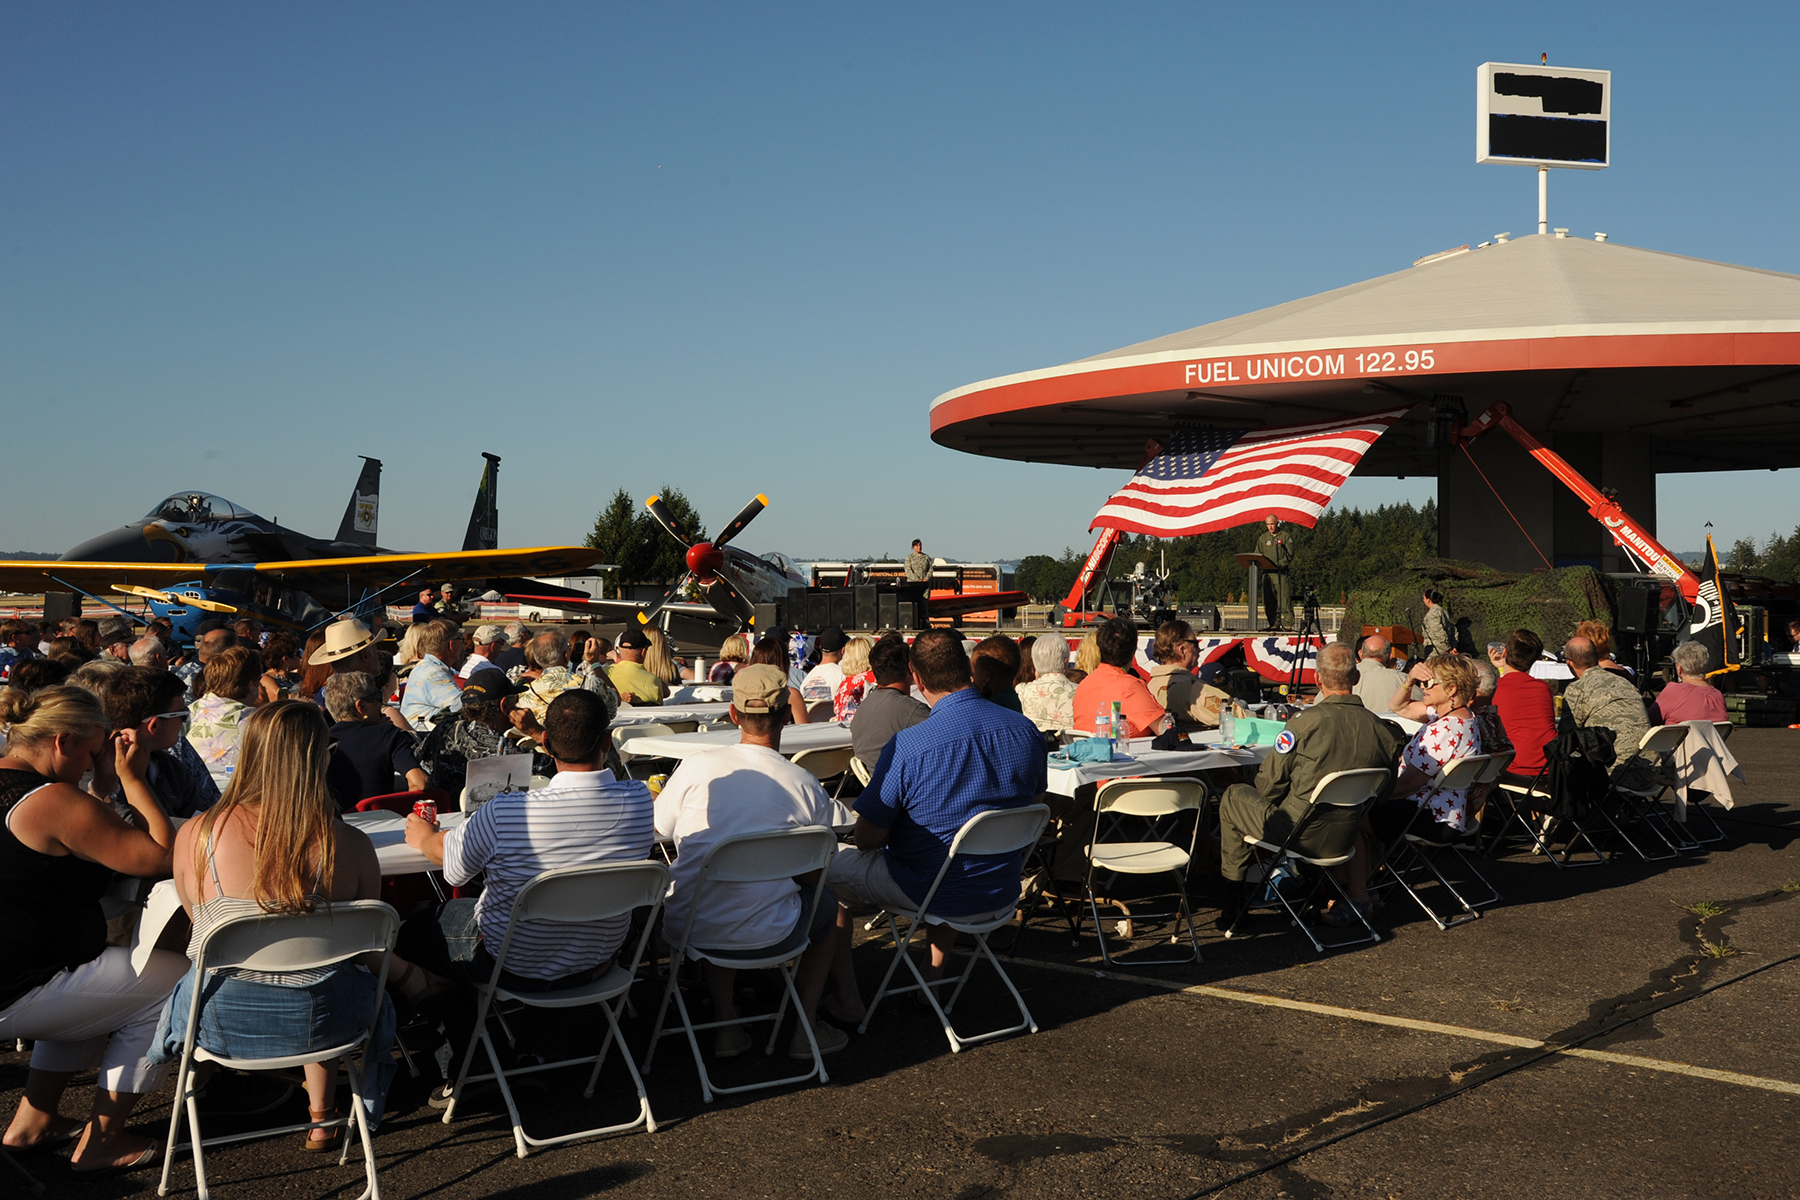 Oregon International Air Show provides fitting backdrop for “All Call